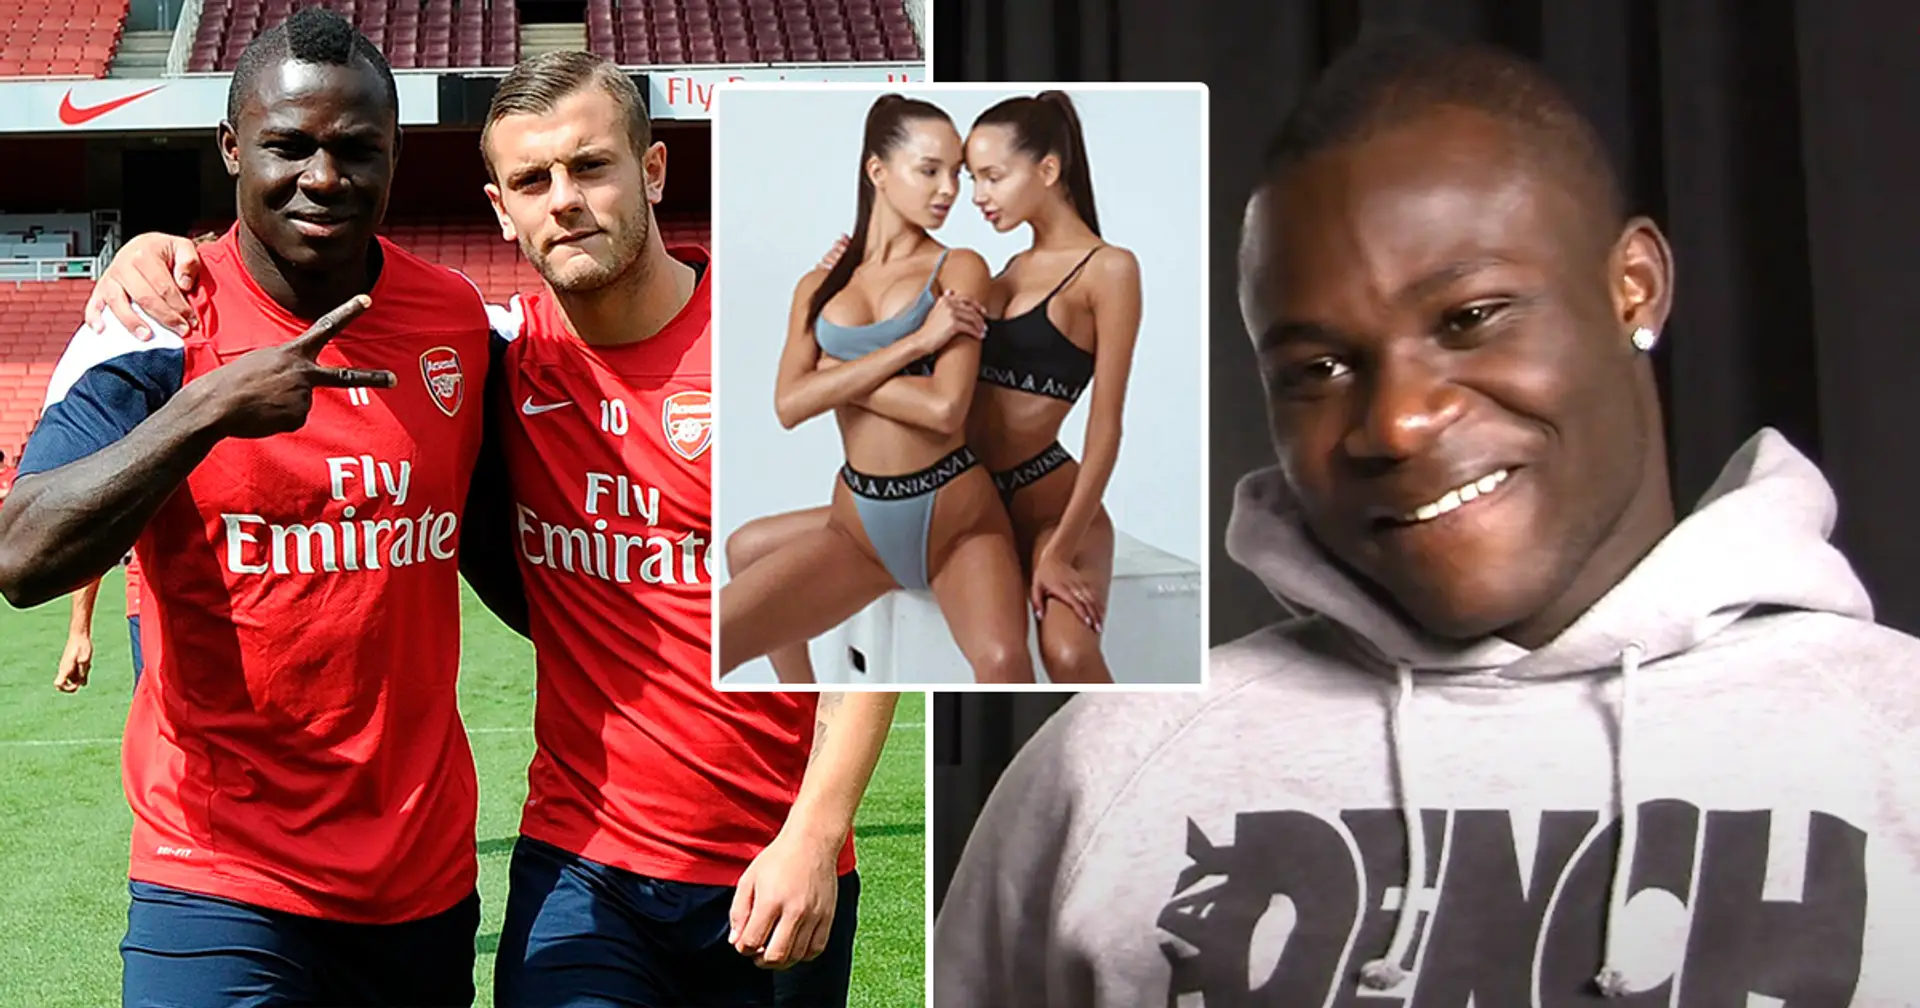 Ex-Gunner Frimpong: 'I want to do porn with 20 *****d Tatar girls'